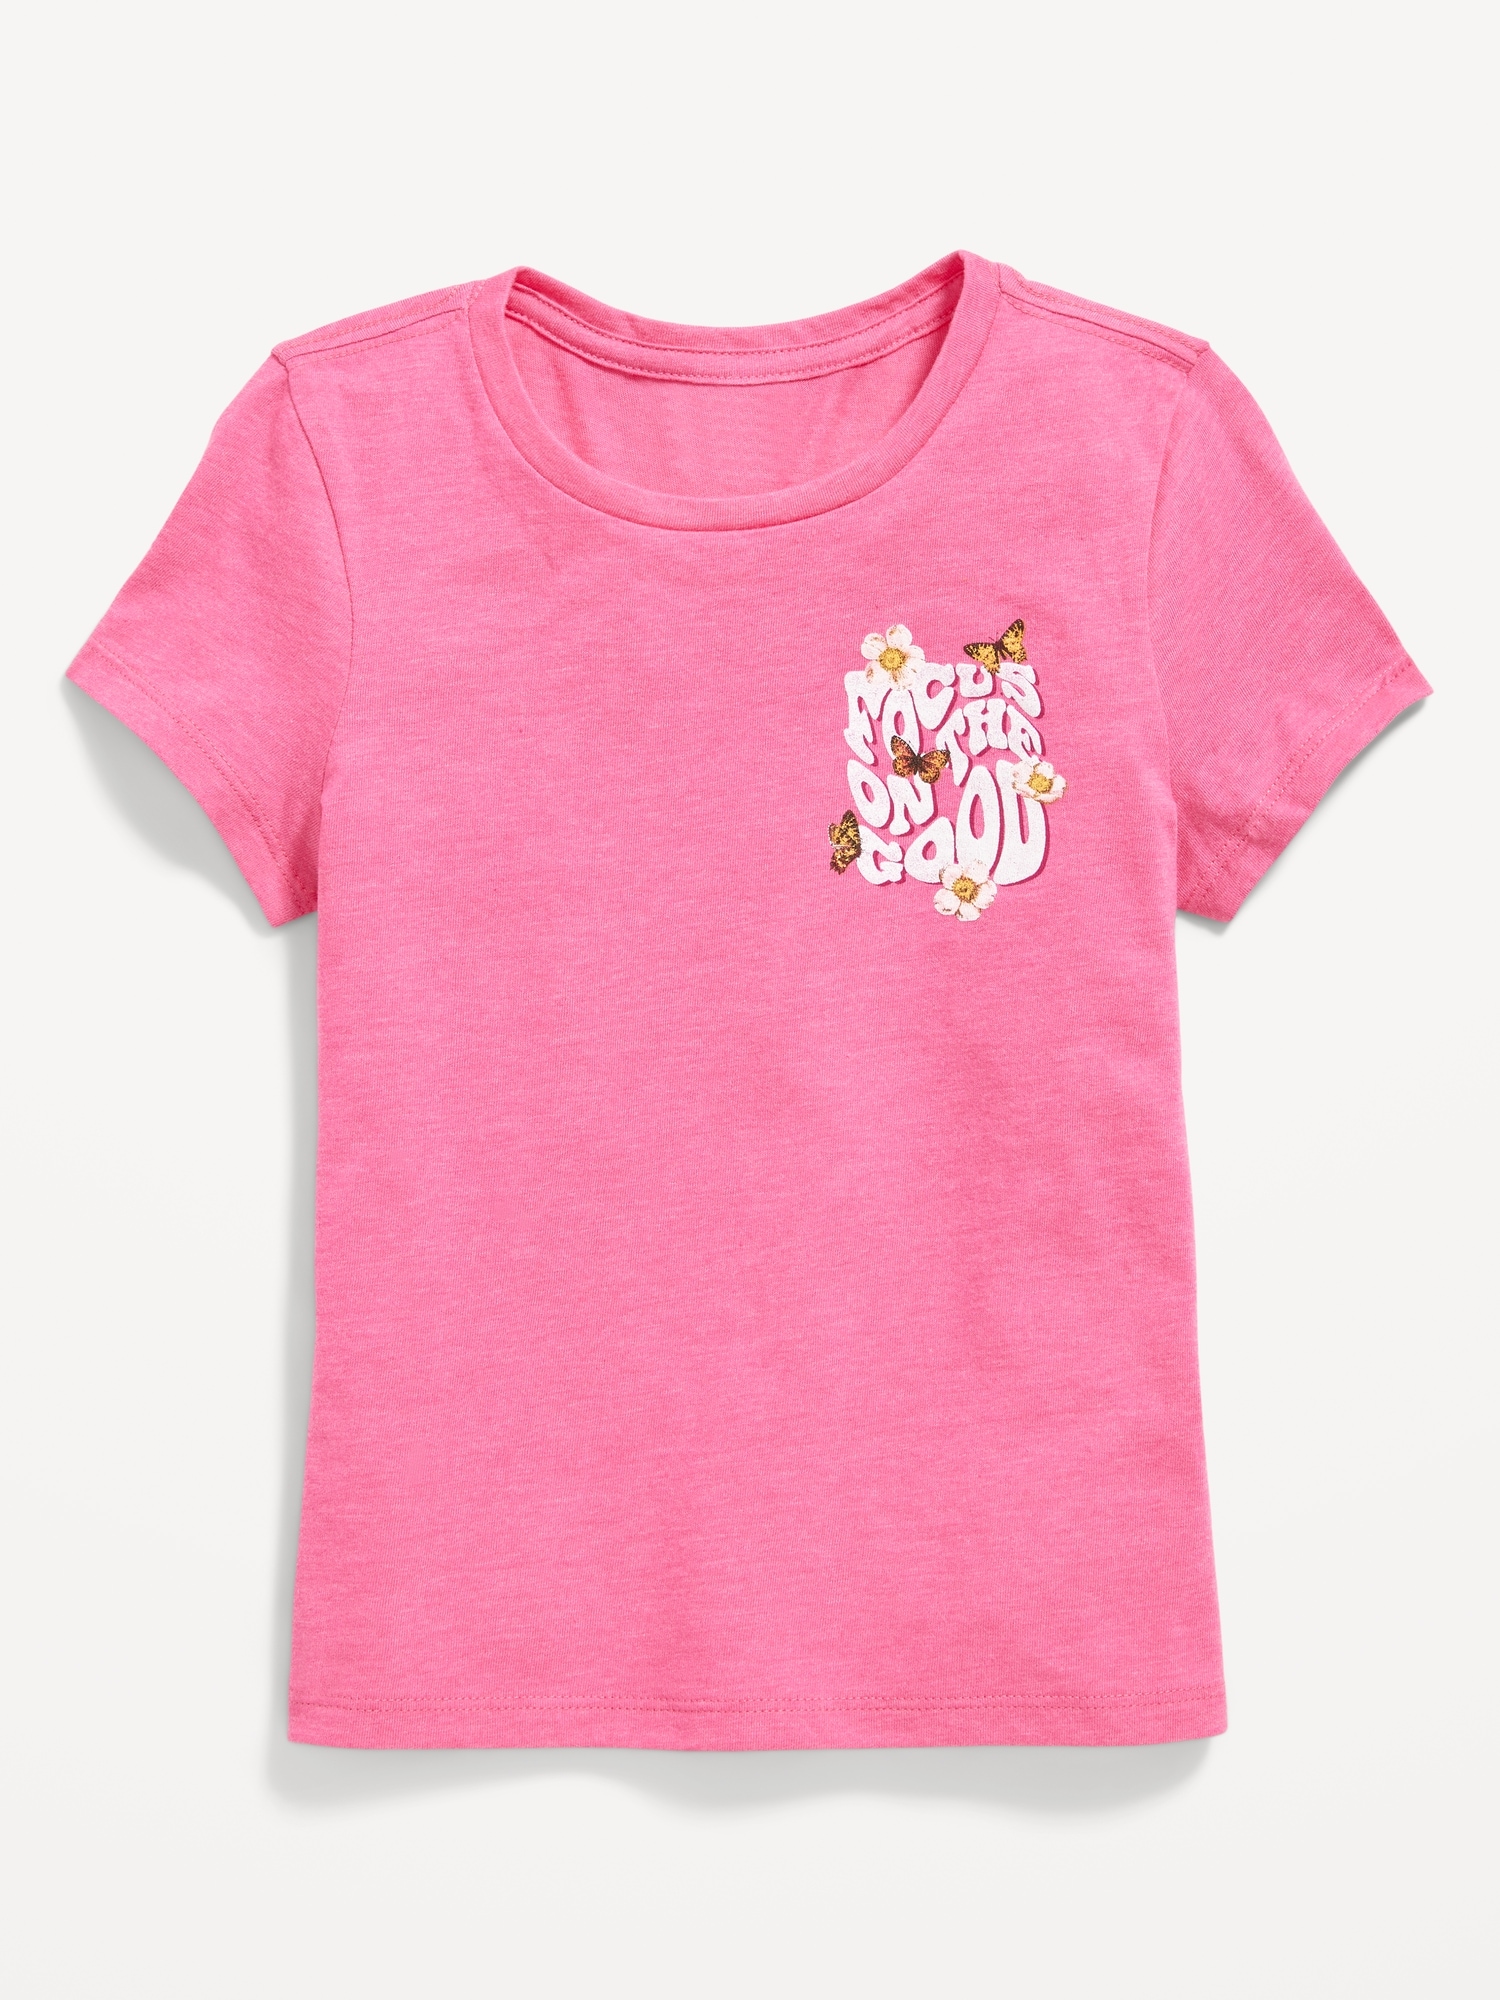 Baby And Toddler Girls T-Shirt Short Sleeve Shirts Solid Print Hot Pink Xxl  